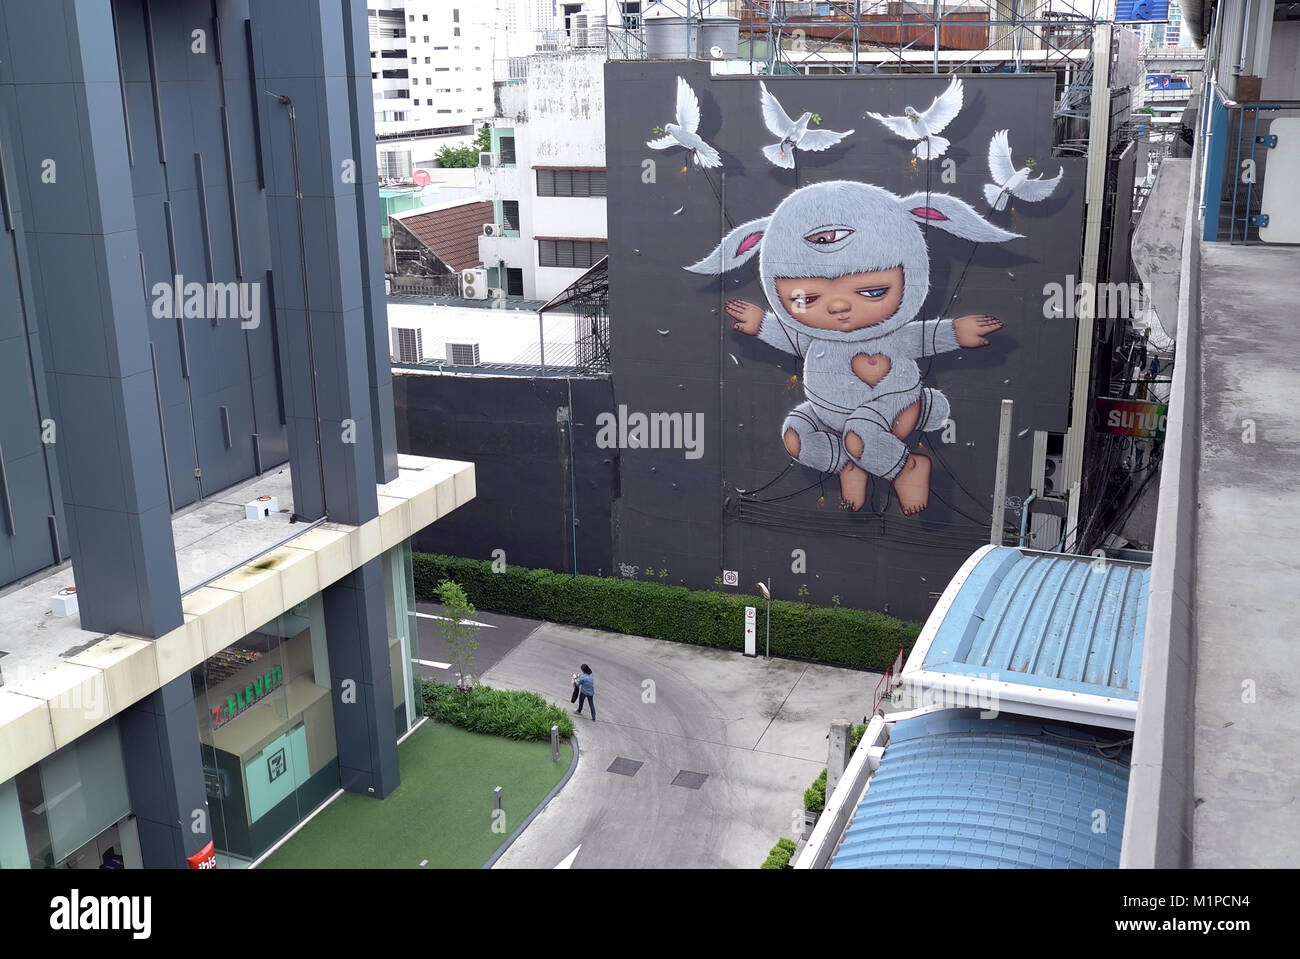 Bangkok, Thailand – June 24, 2016: Mural of graffiti Artist ALEX FACE, who is a well-known street artist in Thailand. Stock Photo